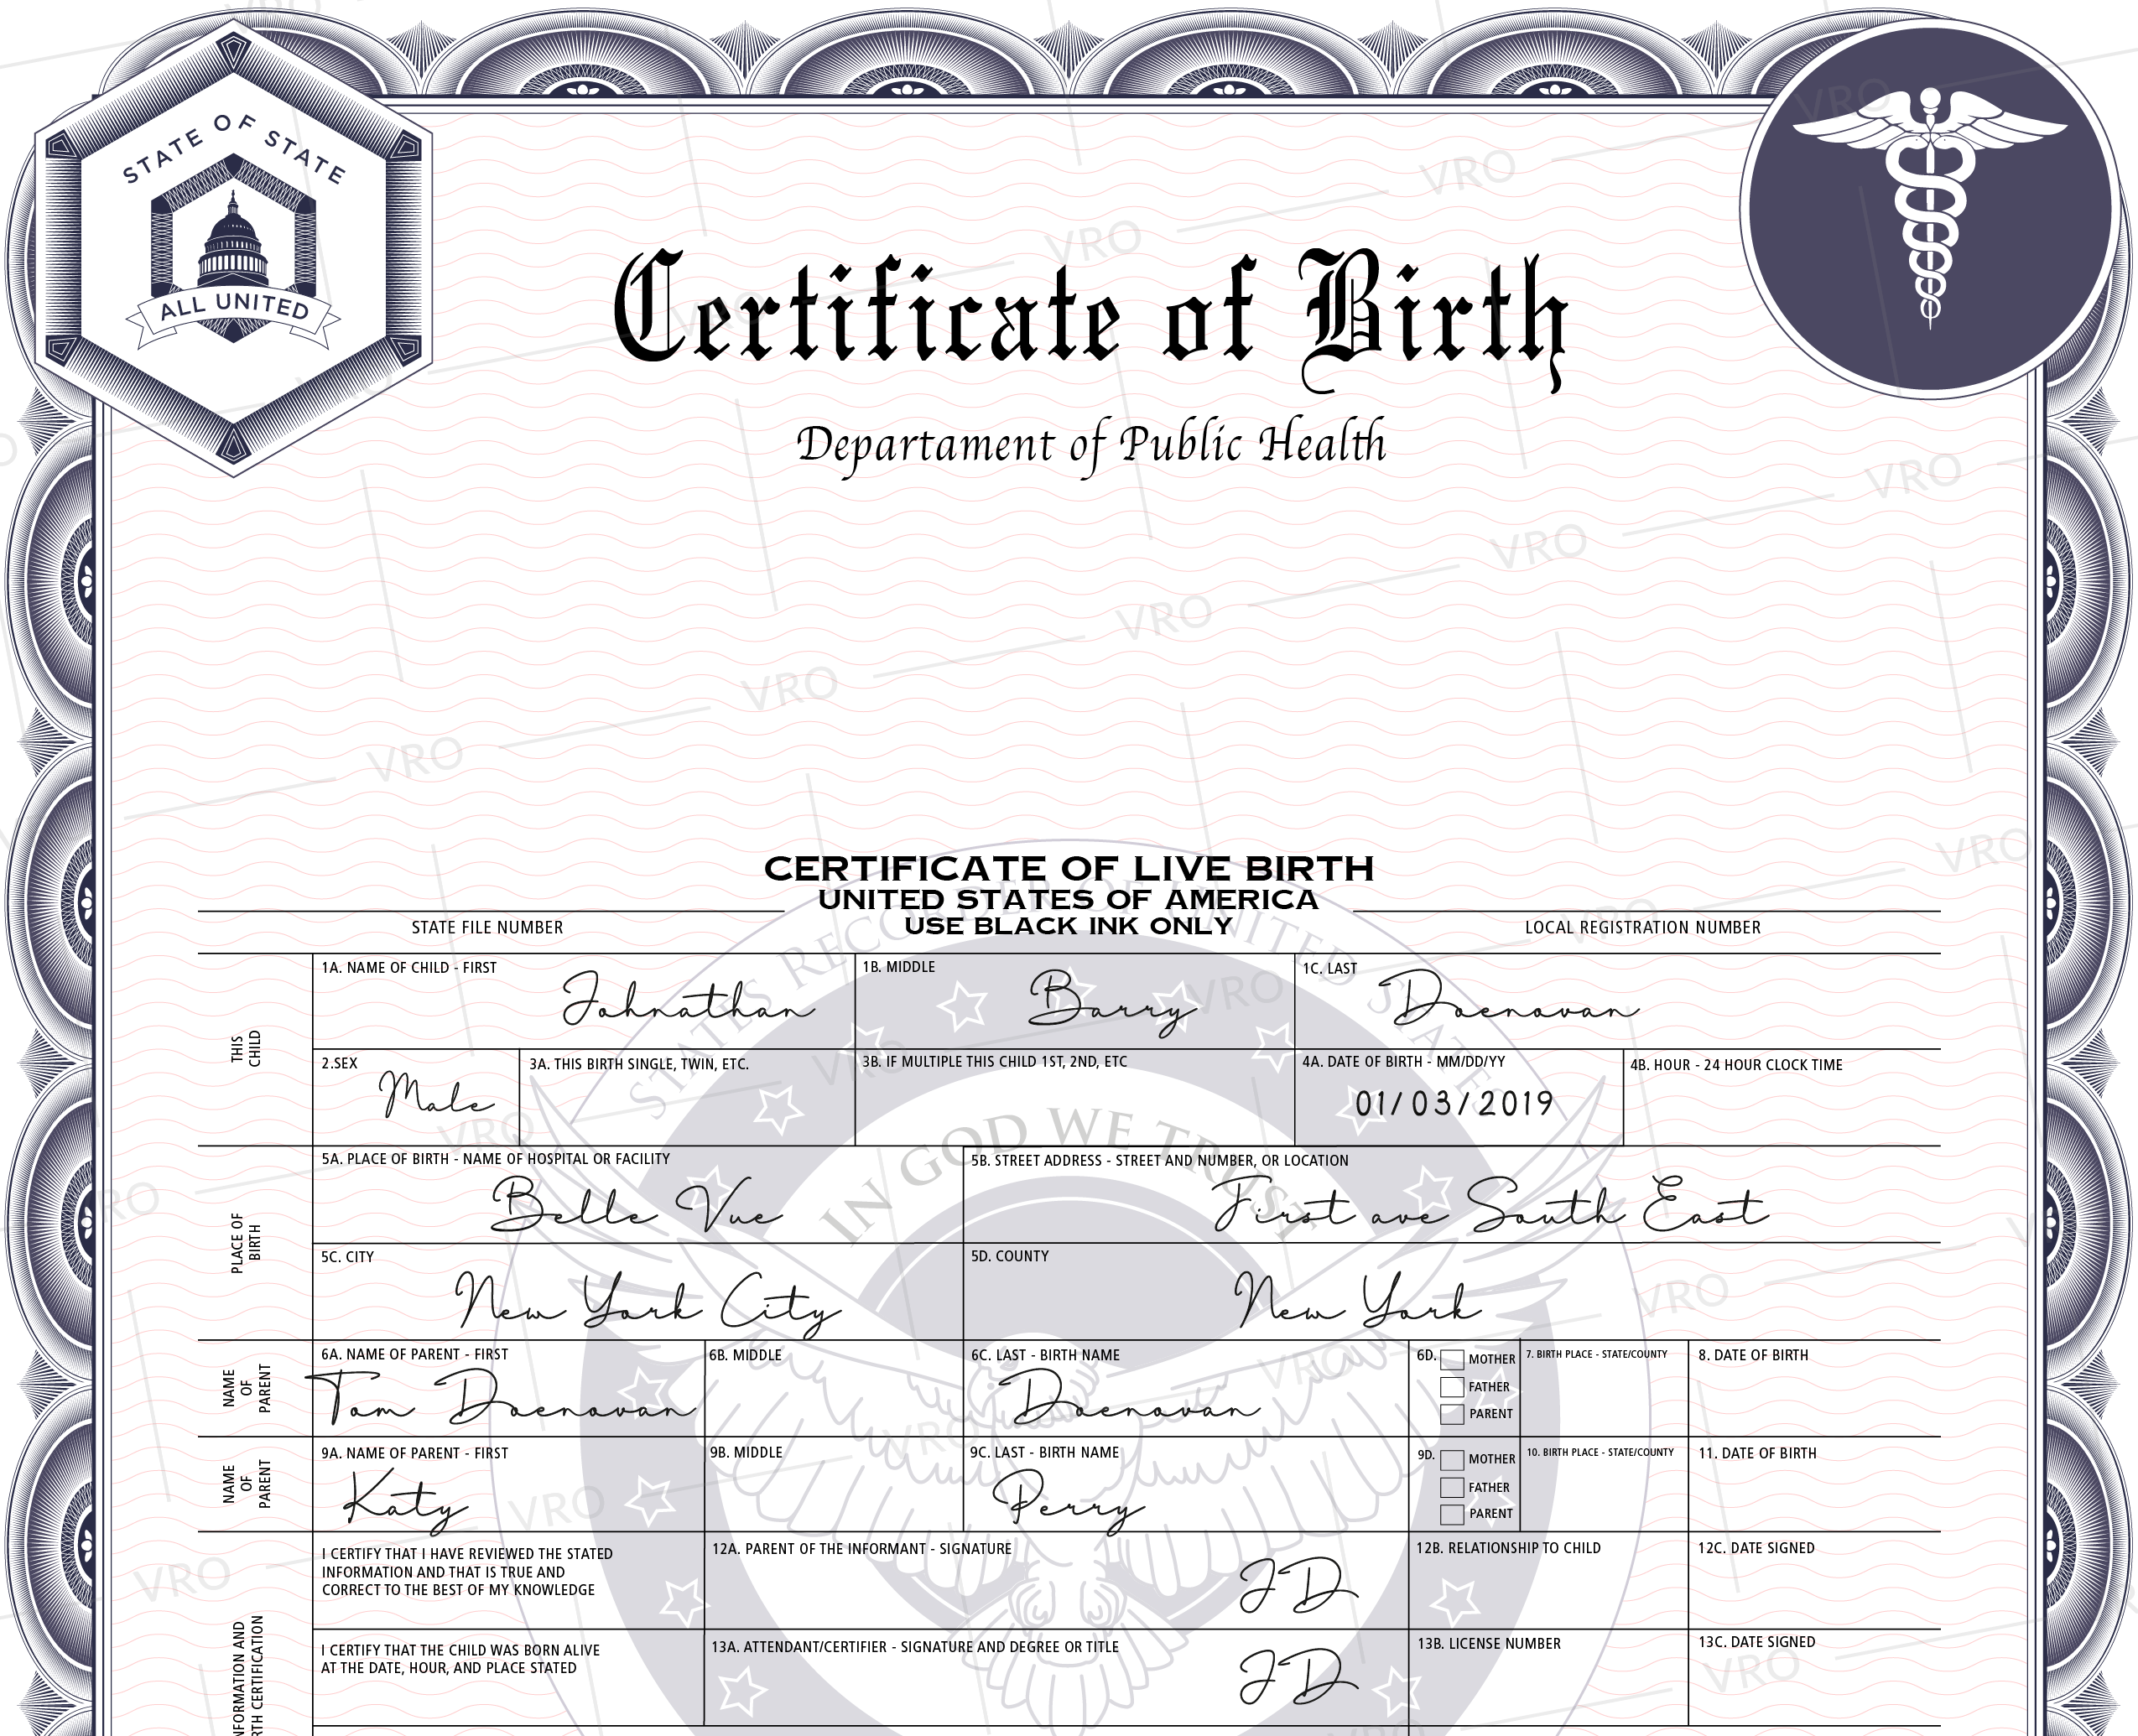 How to get a certified copy of your birth certificate